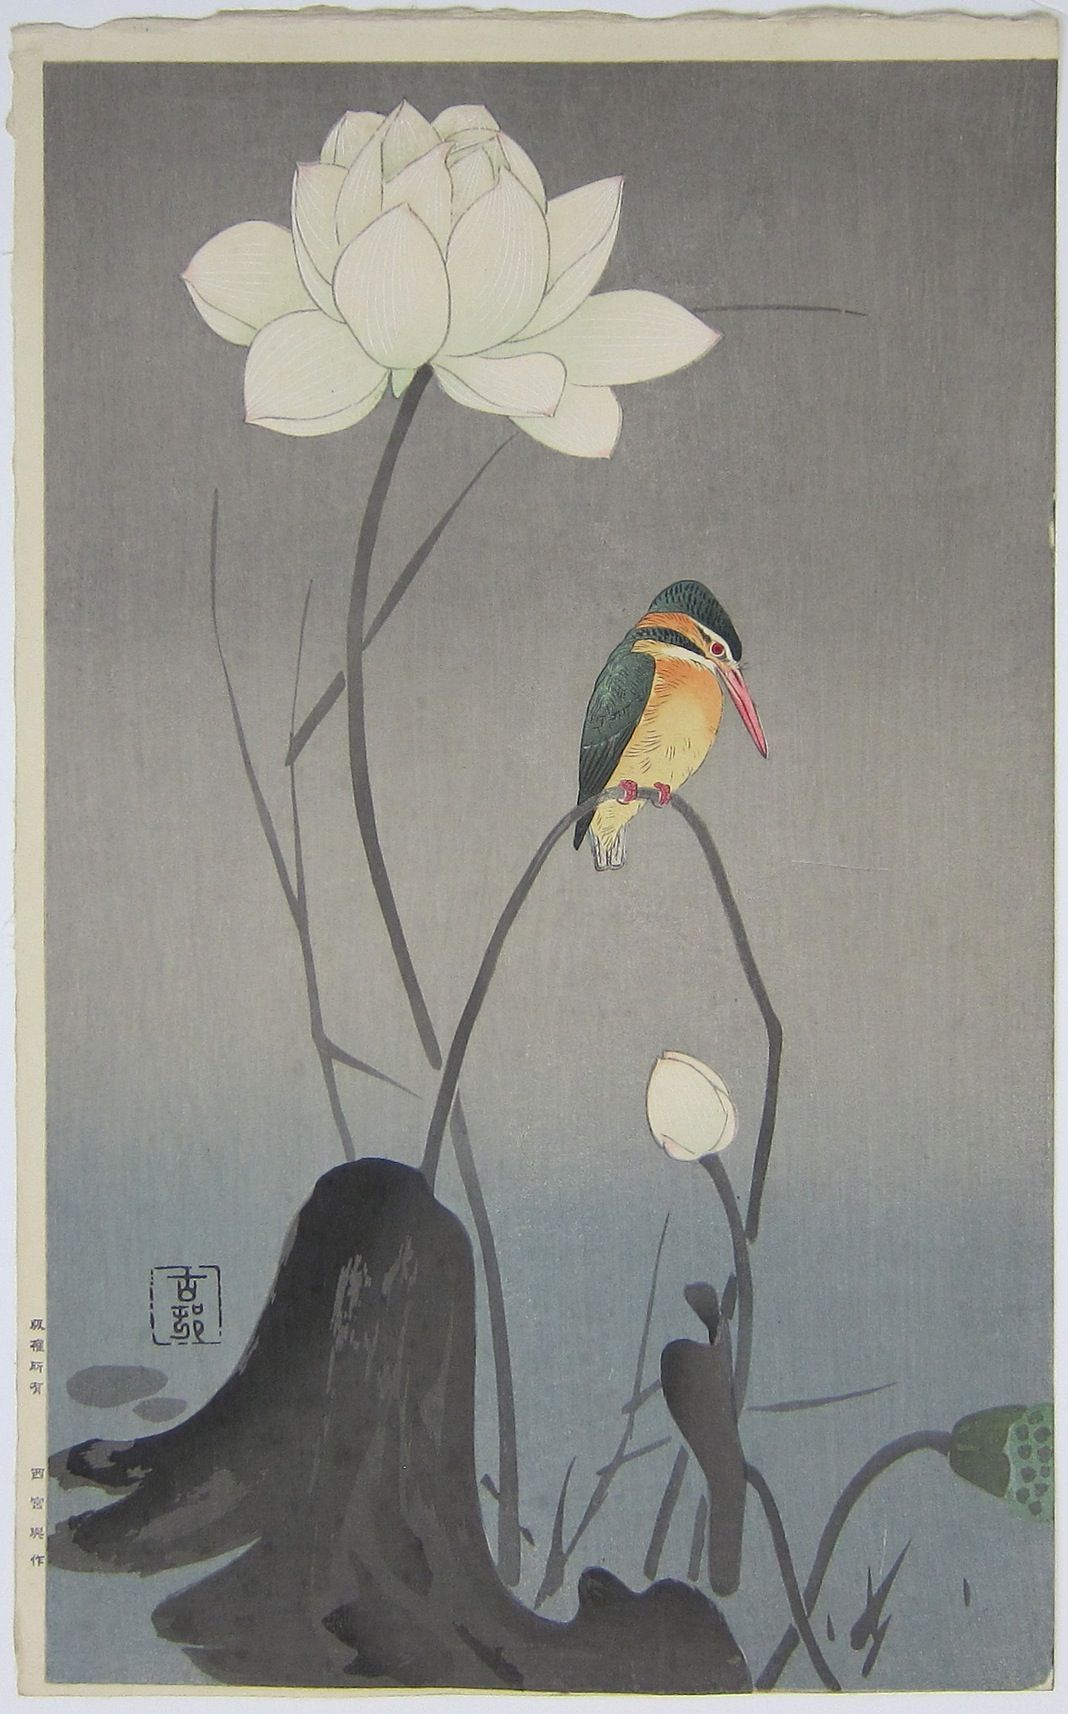 Kingfisher with Lotus Flower.